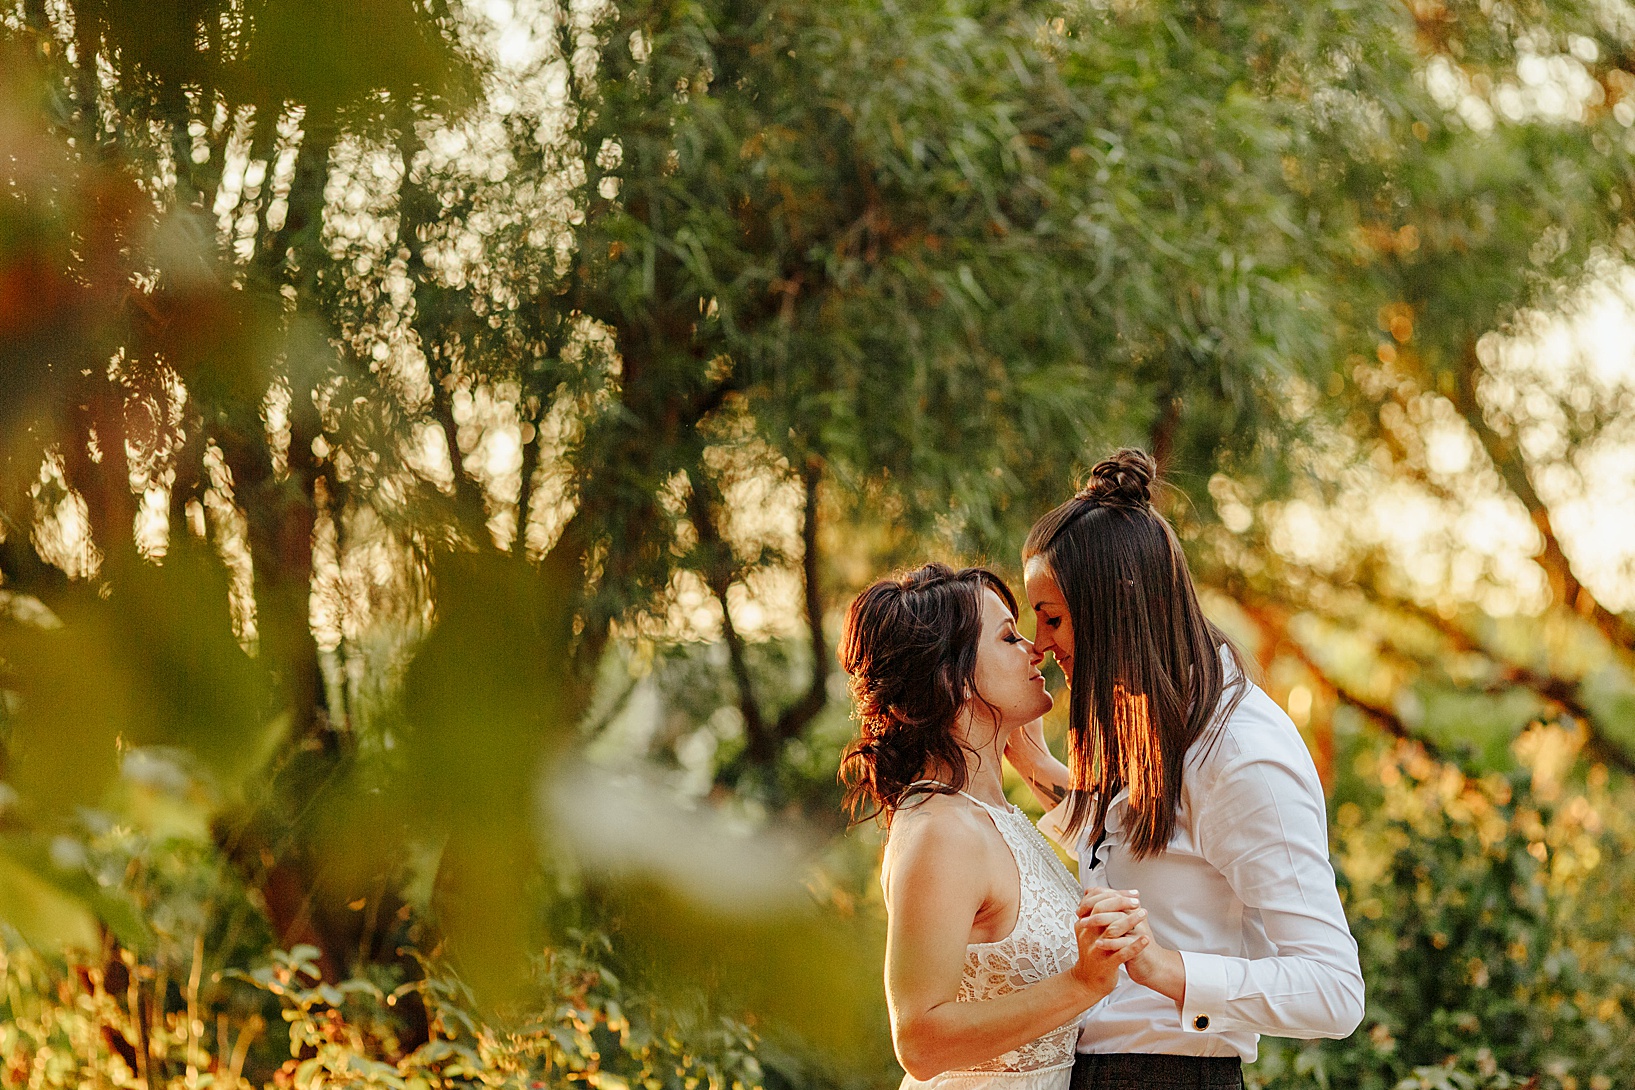 sunset photos for Temecula wedding at Galway Downs